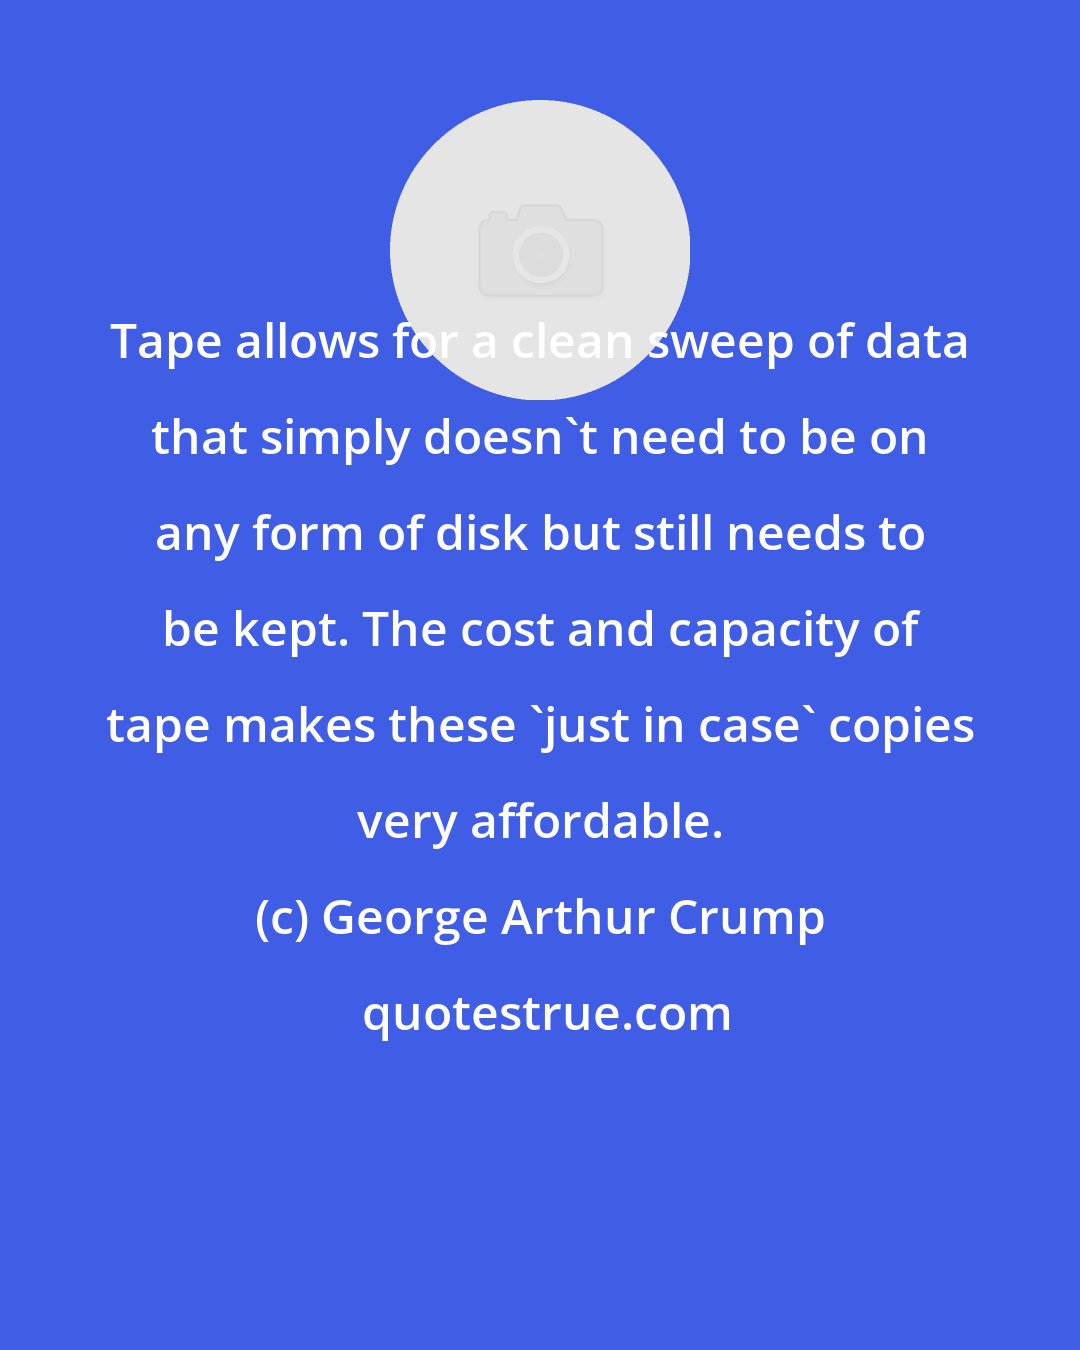 George Arthur Crump: Tape allows for a clean sweep of data that simply doesn't need to be on any form of disk but still needs to be kept. The cost and capacity of tape makes these 'just in case' copies very affordable.